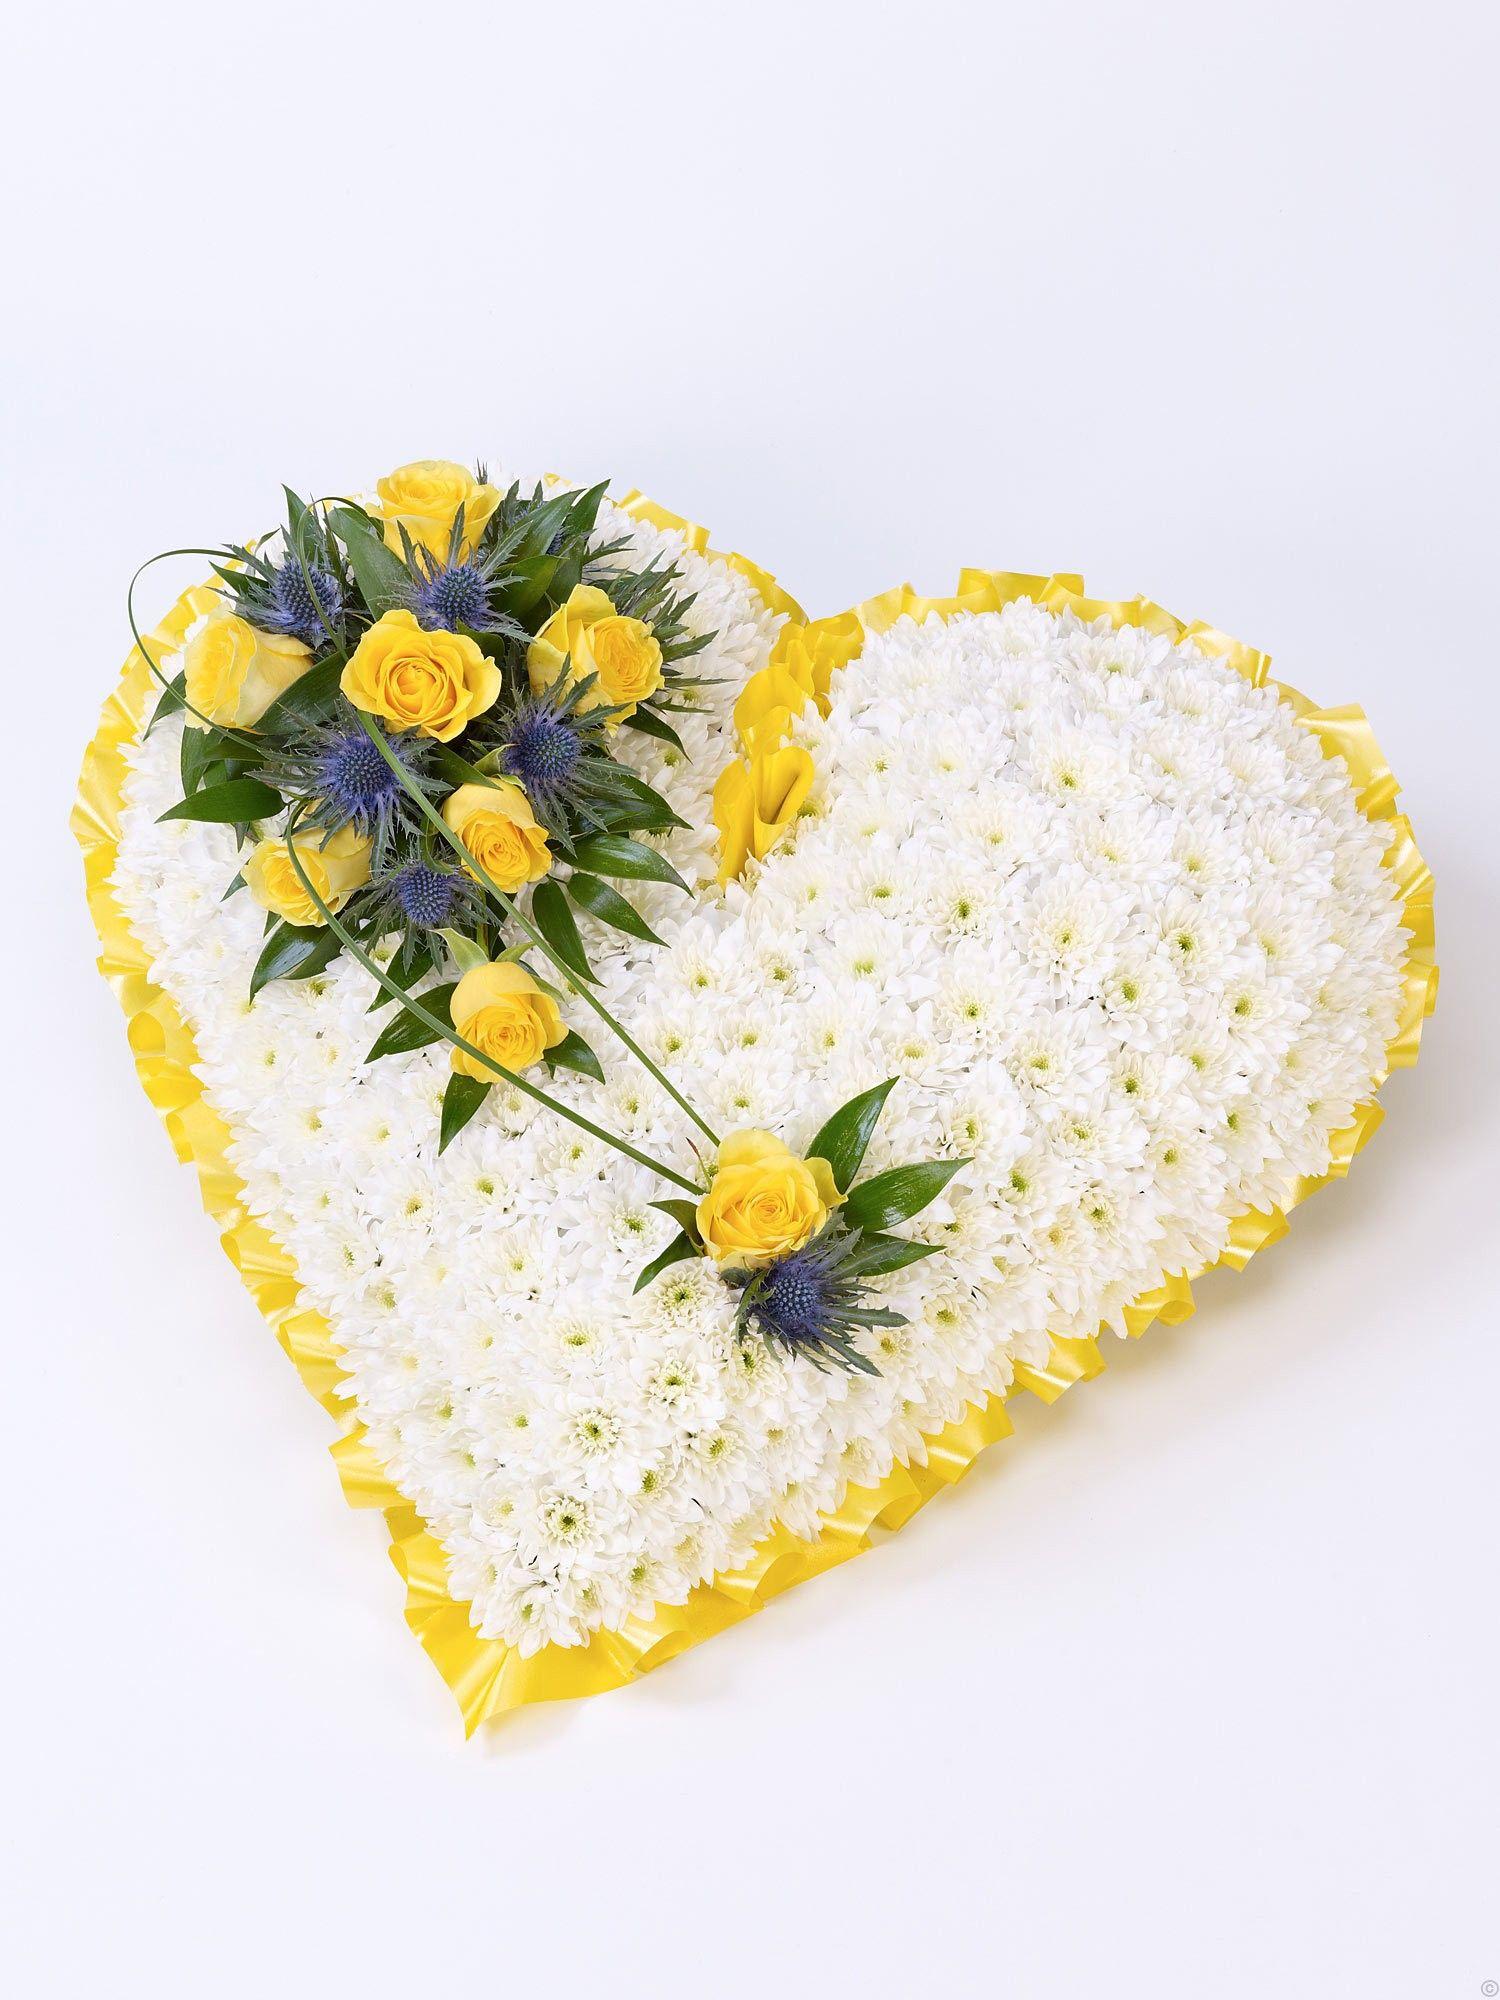 Red Yellow Heart Logo - Yellow Heart Wreath - The RED Petal Florists